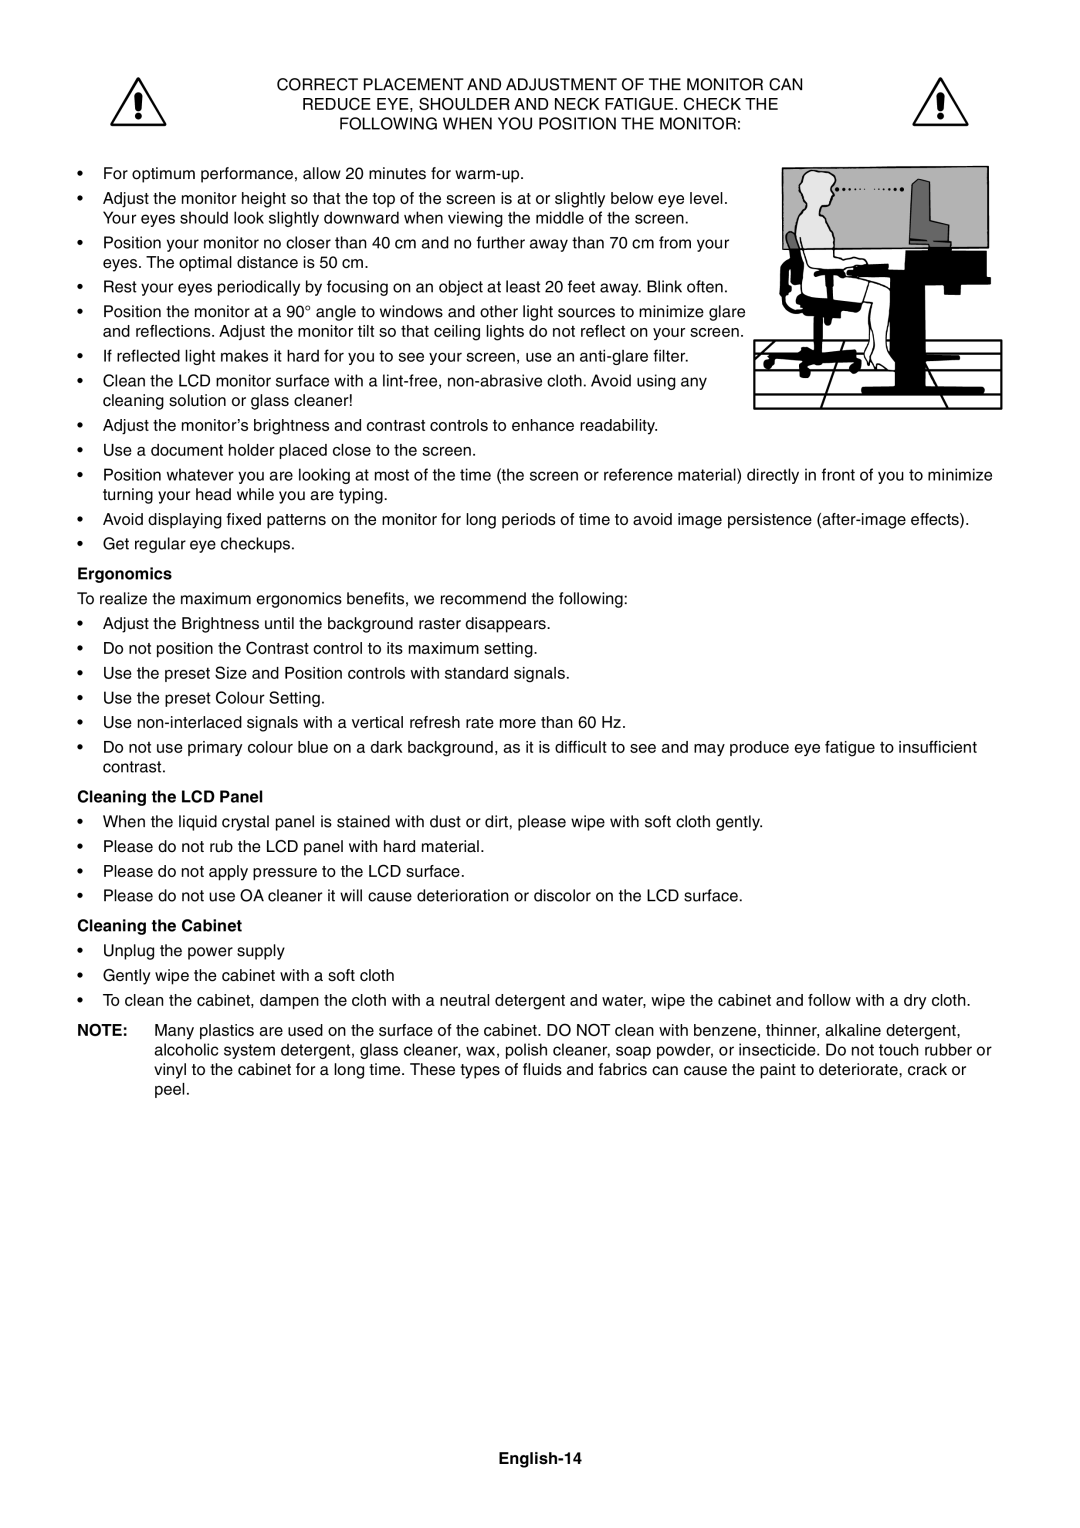 NEC 2690 user manual Ergonomics, Cleaning the LCD Panel, Cleaning the Cabinet, English-14 